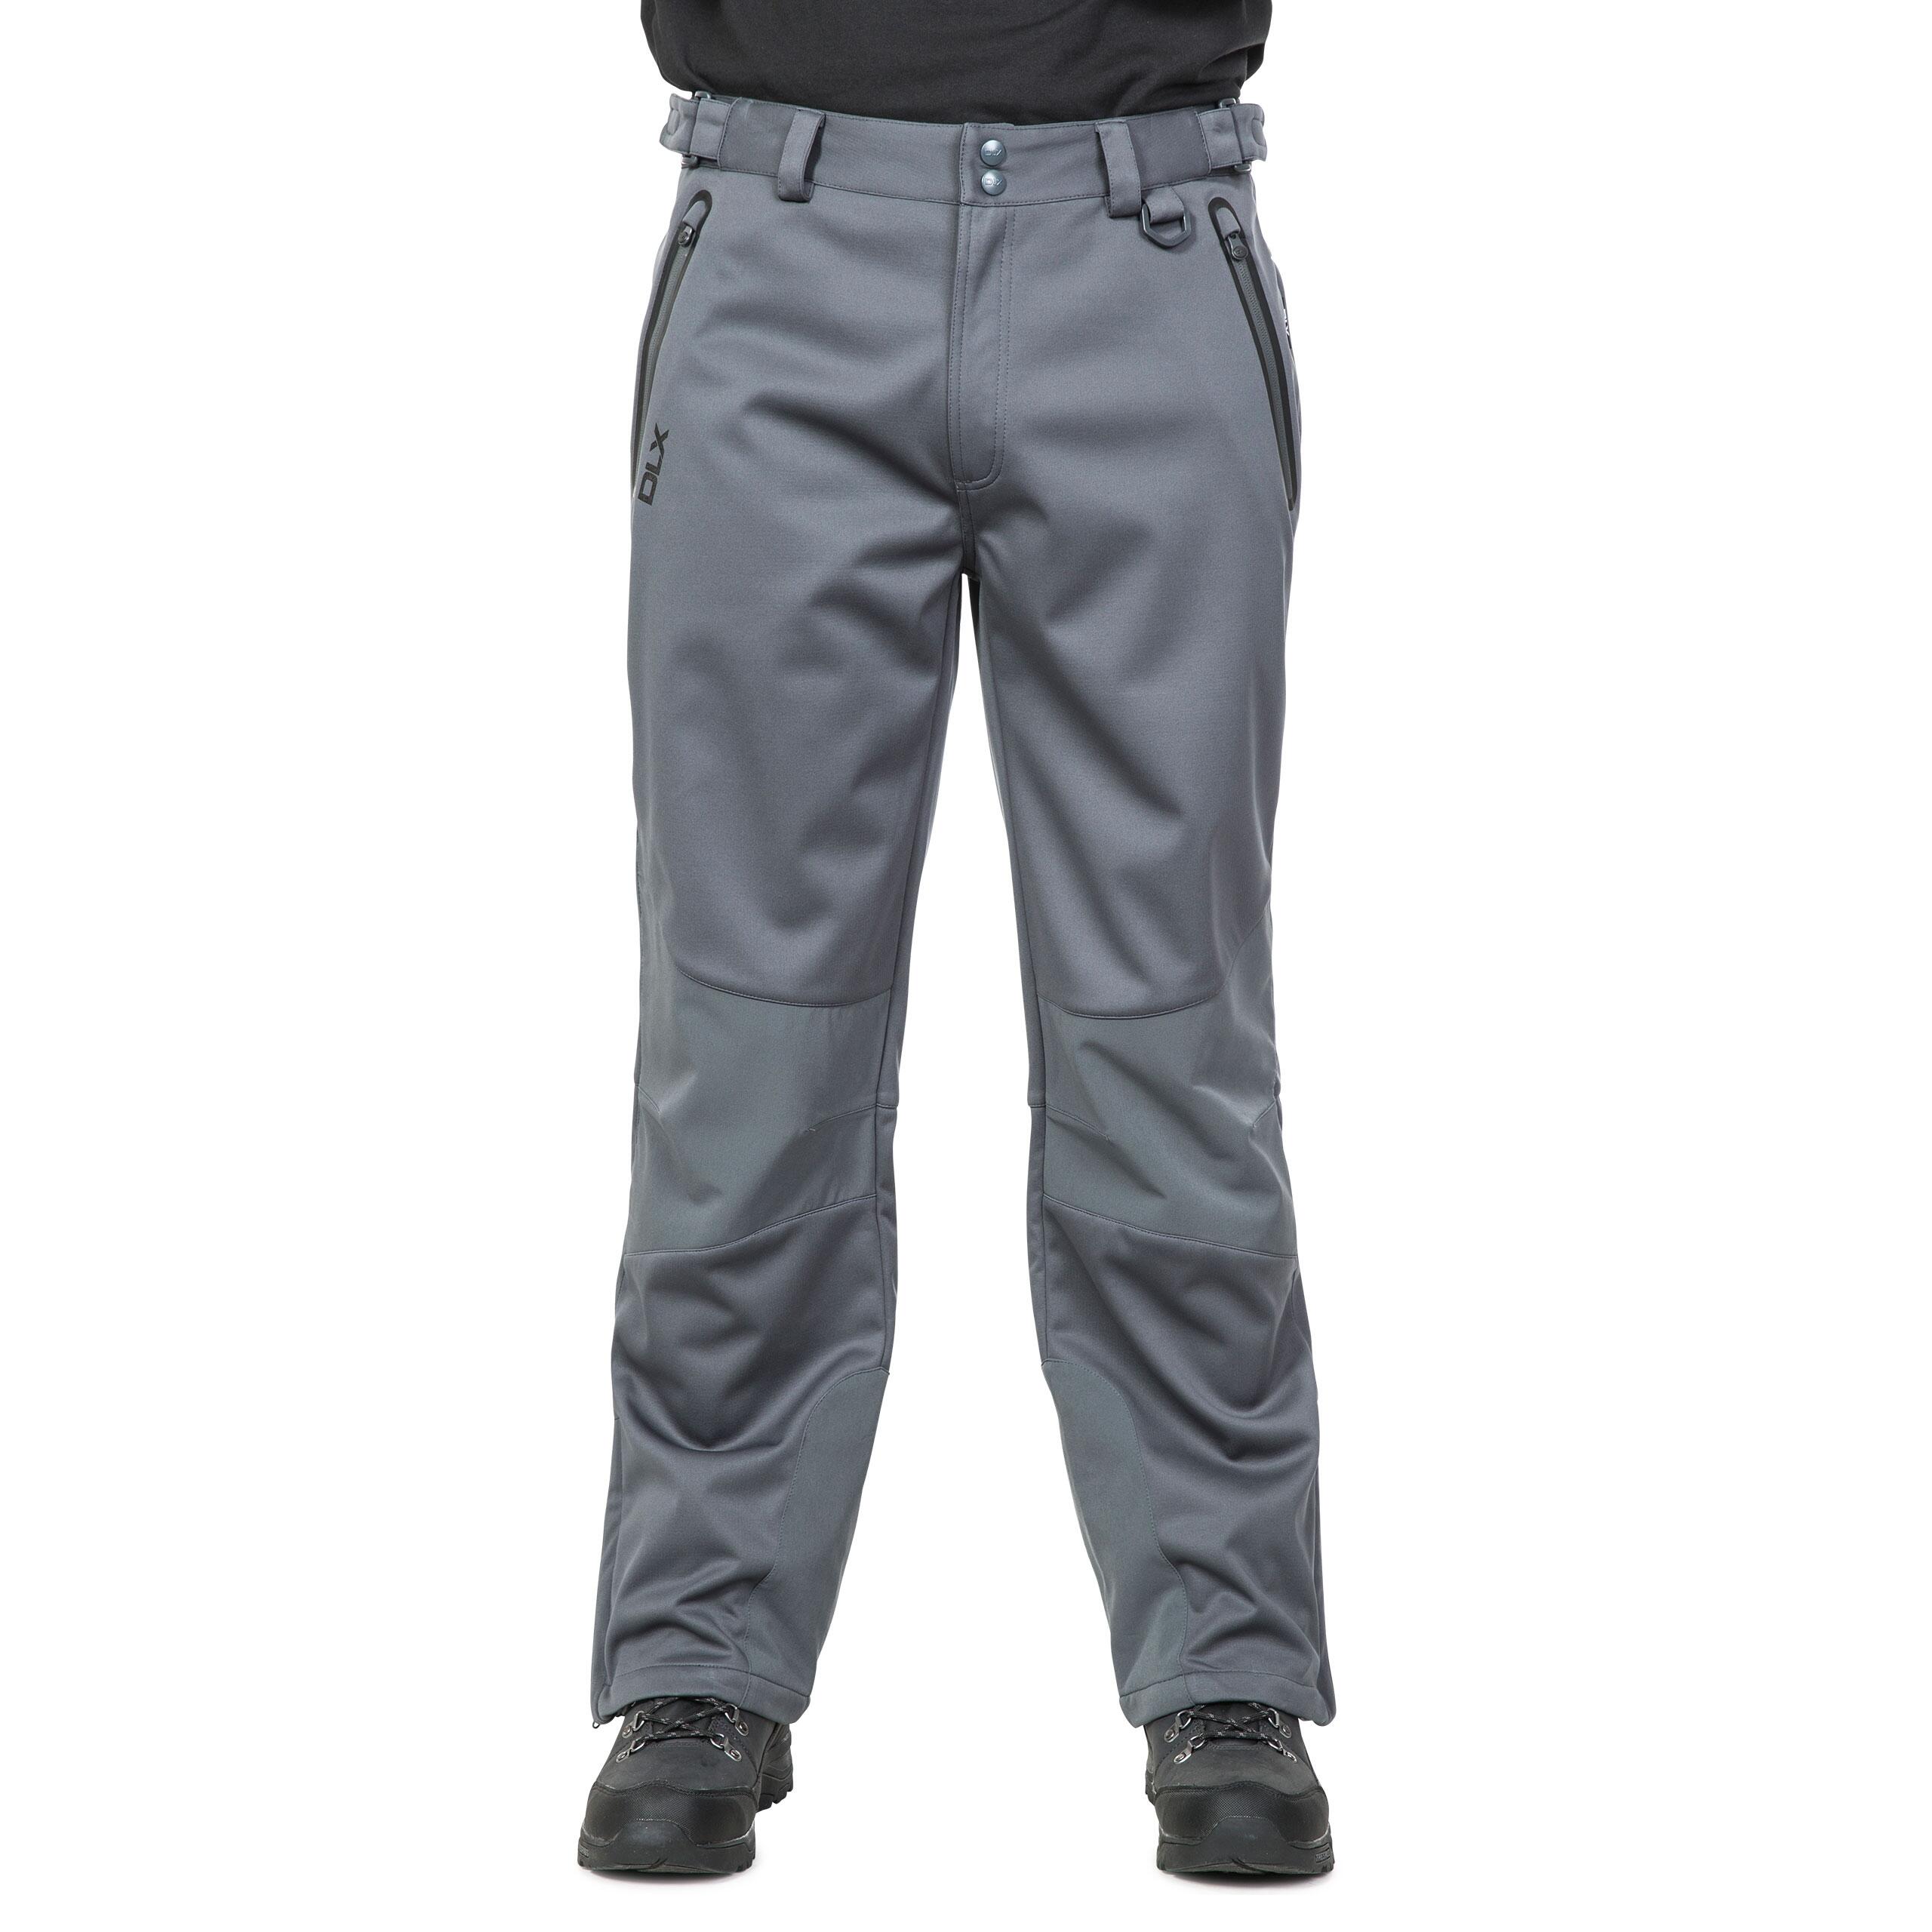 DLX Mens Walking Trousers Cargo Pant Hiking Holloway